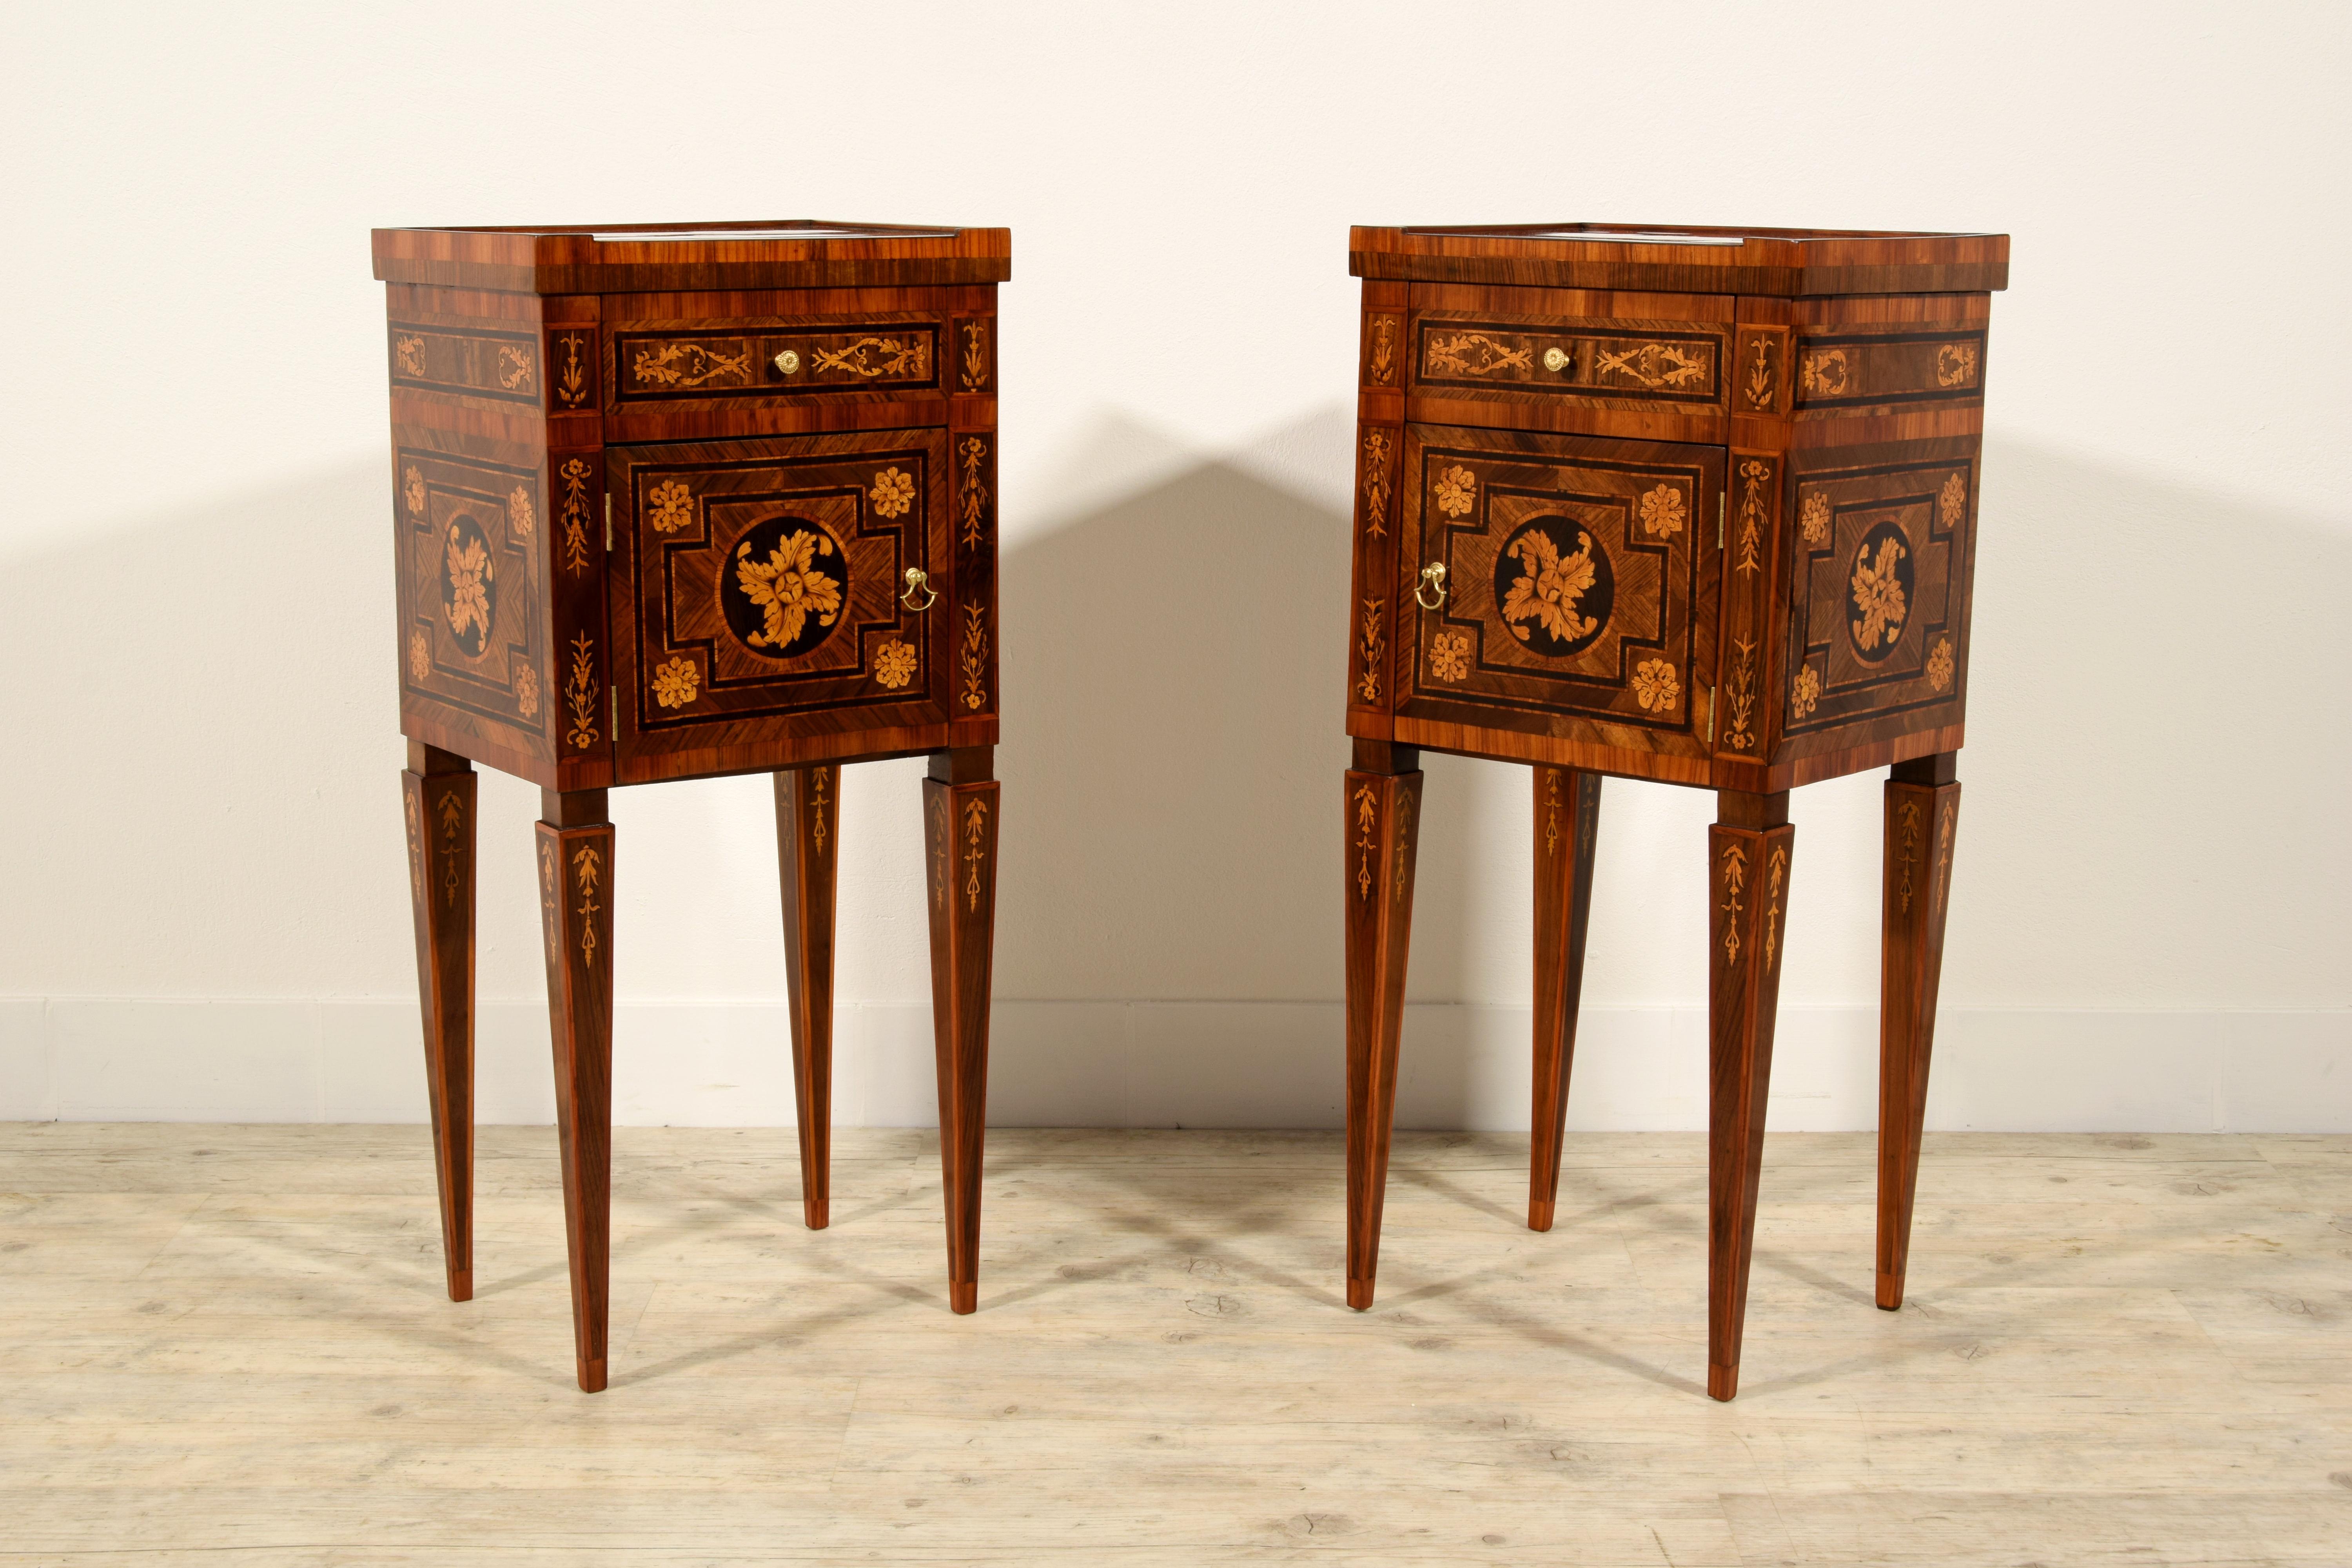 18th Century, Pair of Italian Neoclassical Inlaid Wood Bedside Tables 1